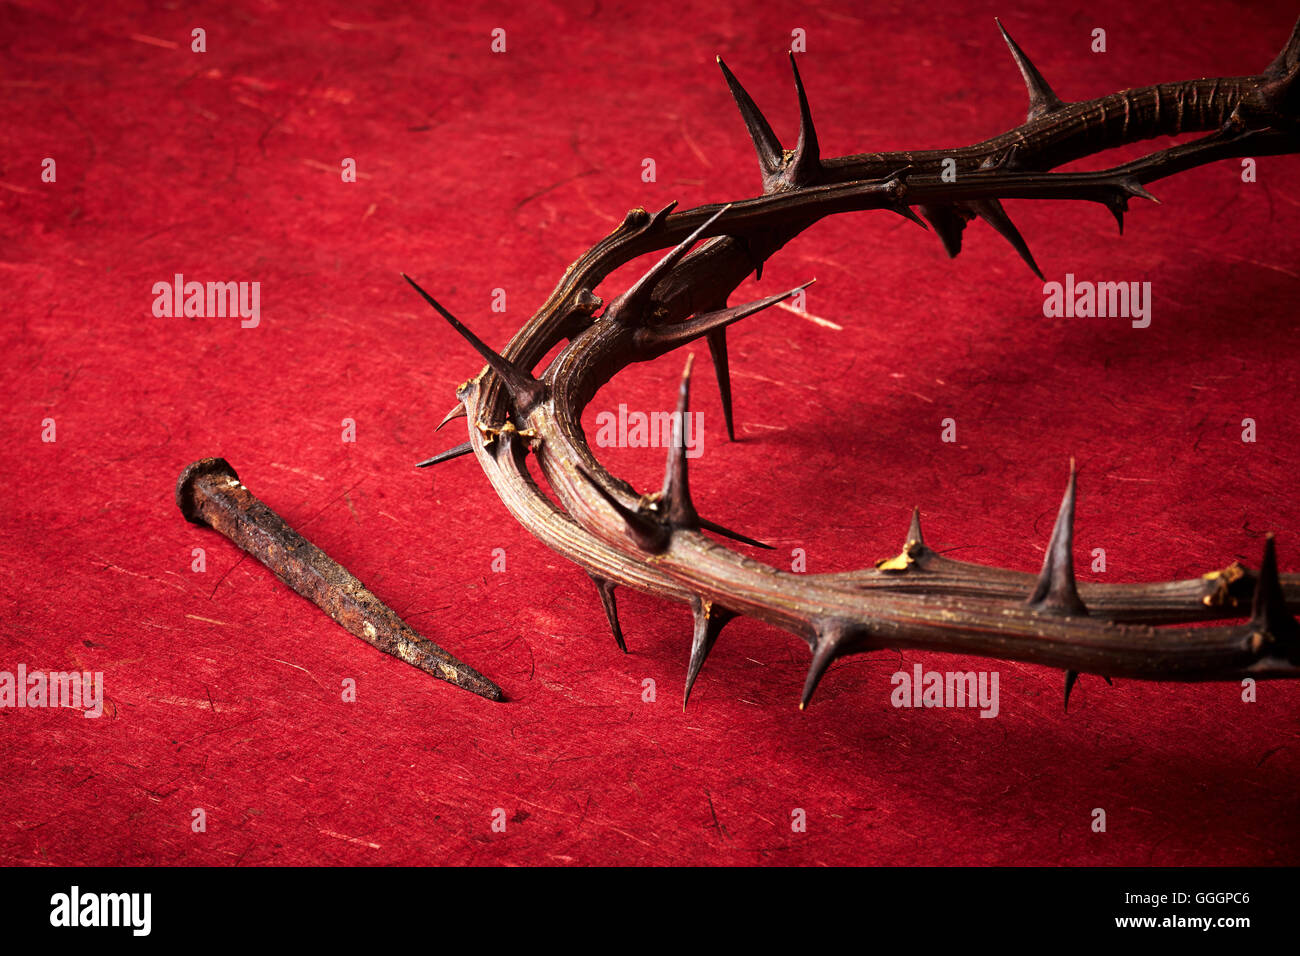 week of passion. Jesus Christ crown of thorns and a nail on red background Stock Photo